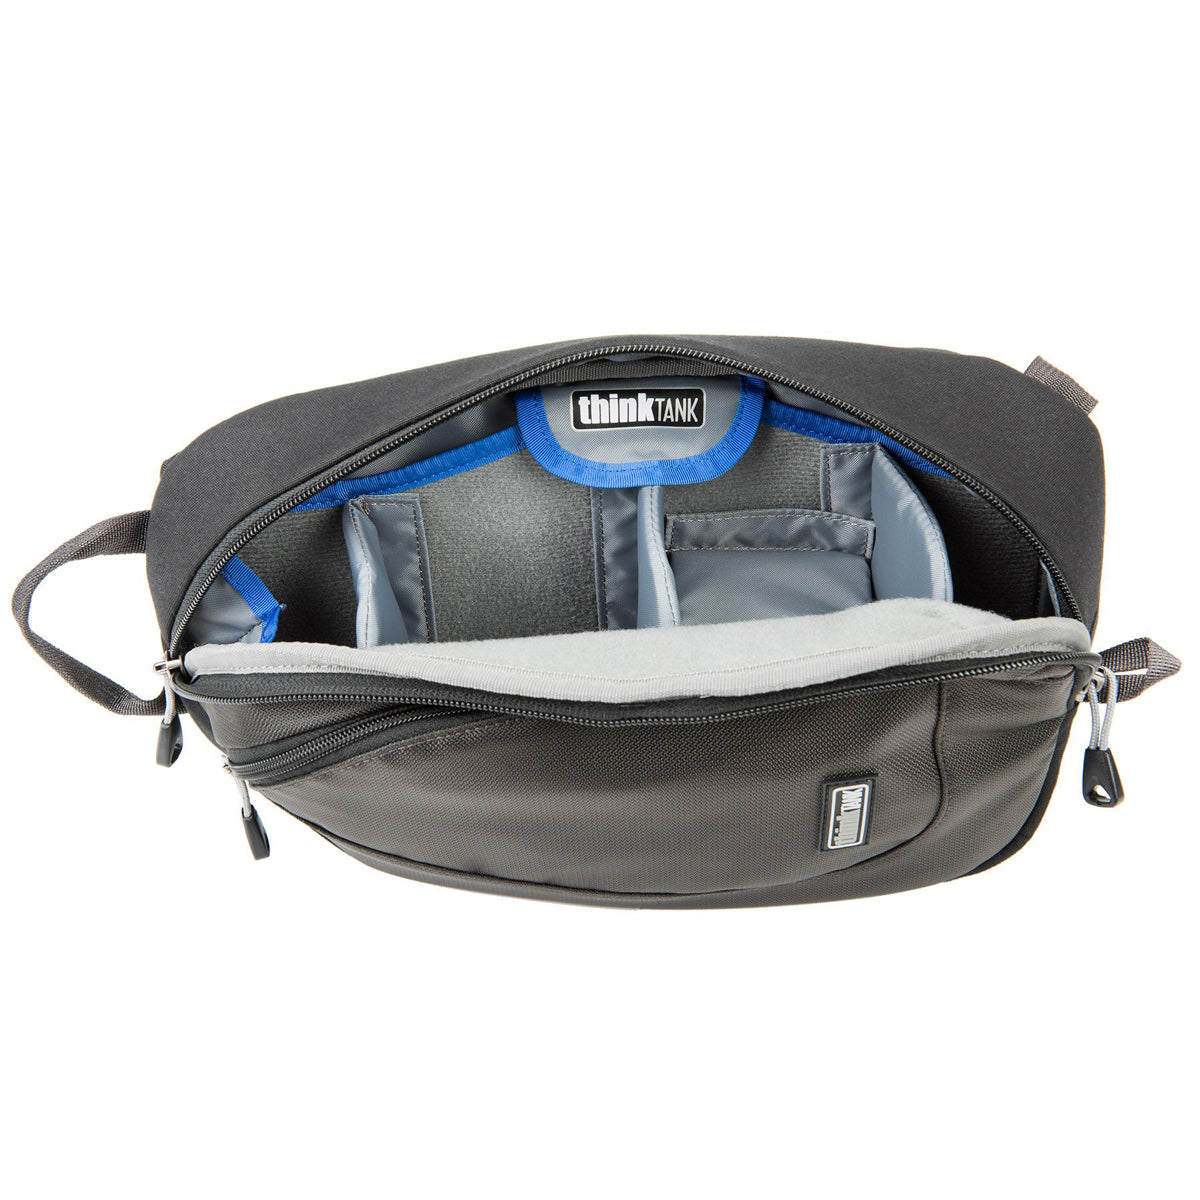 Think Tank TurnStyle 5 V2.0 (Charcoal)